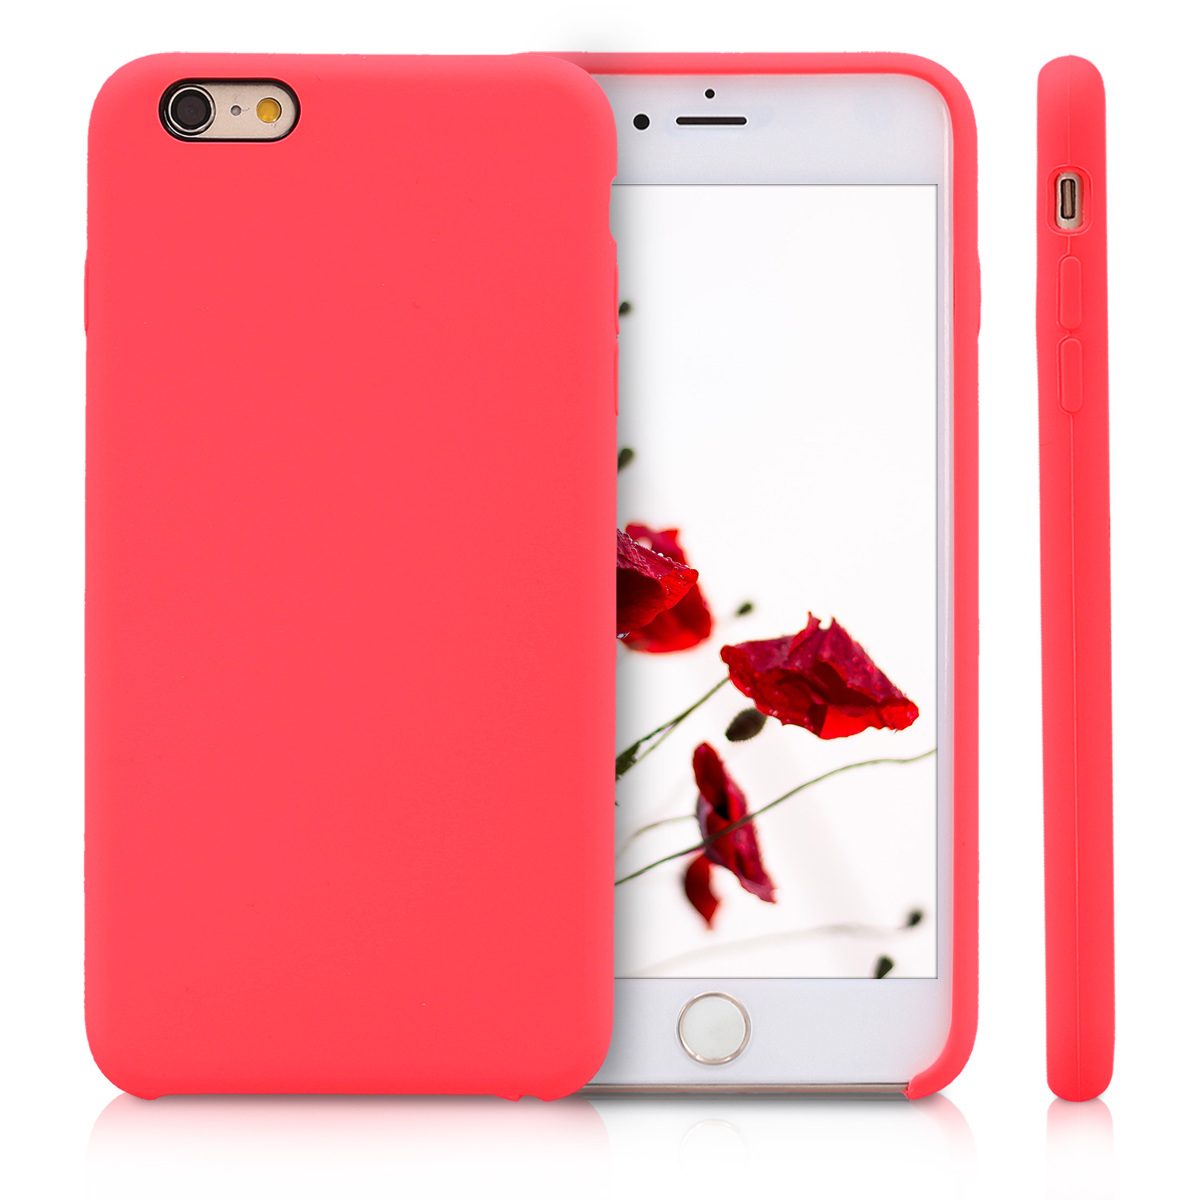 Silicone Case For Apple Iphone 6 Plus 6s Plus Tpu Rubberized Cover Ebay